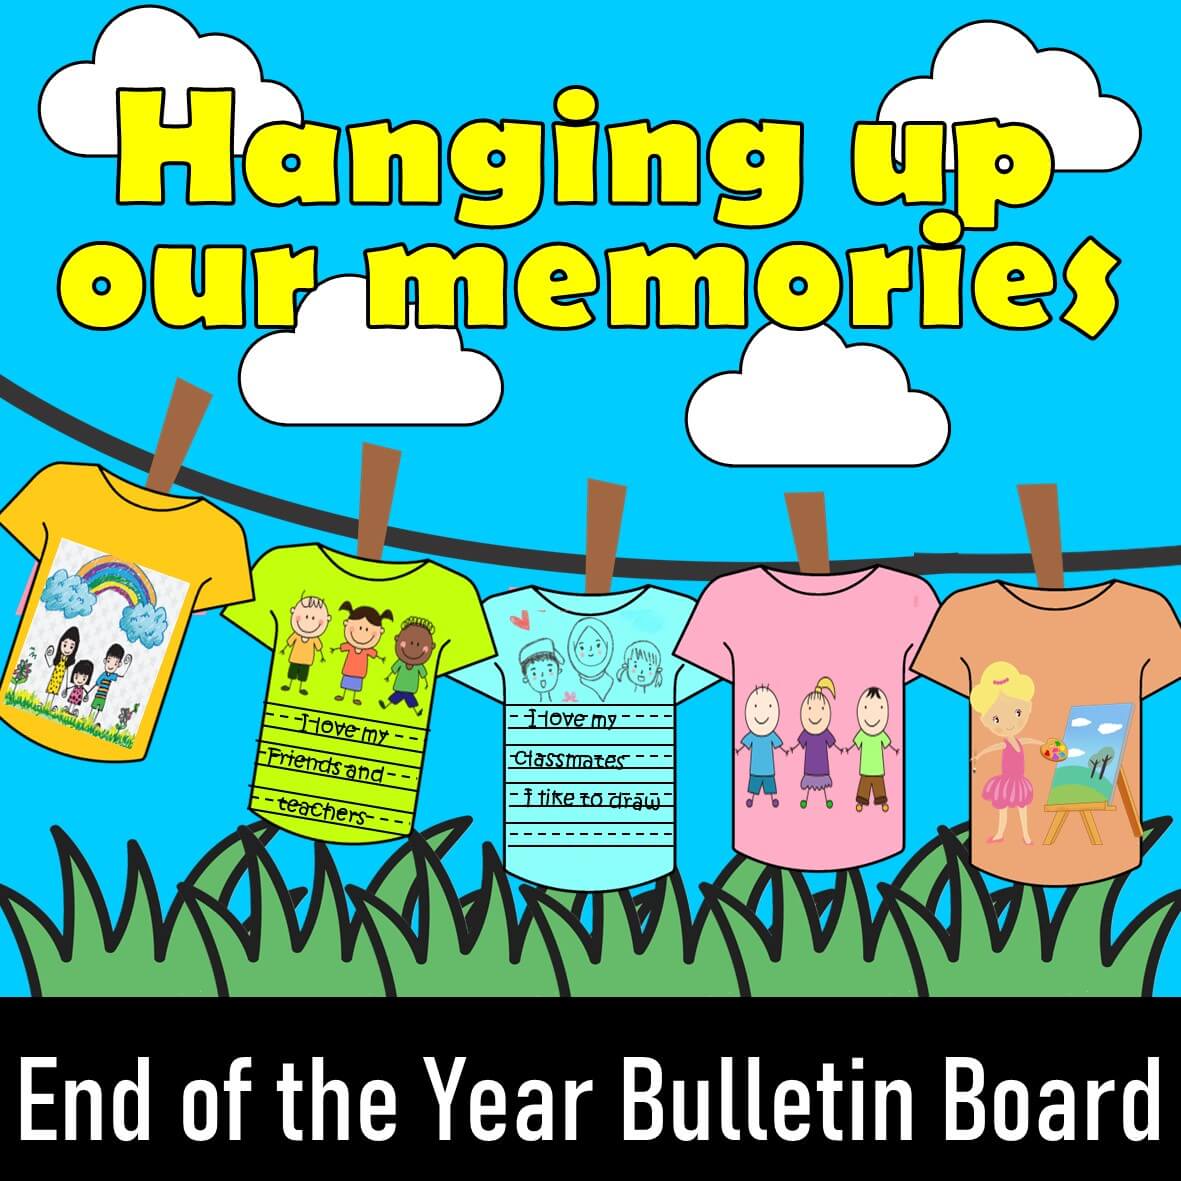 End of the Year Bulletin Board, June door decor ideas. Hanging up our Memories